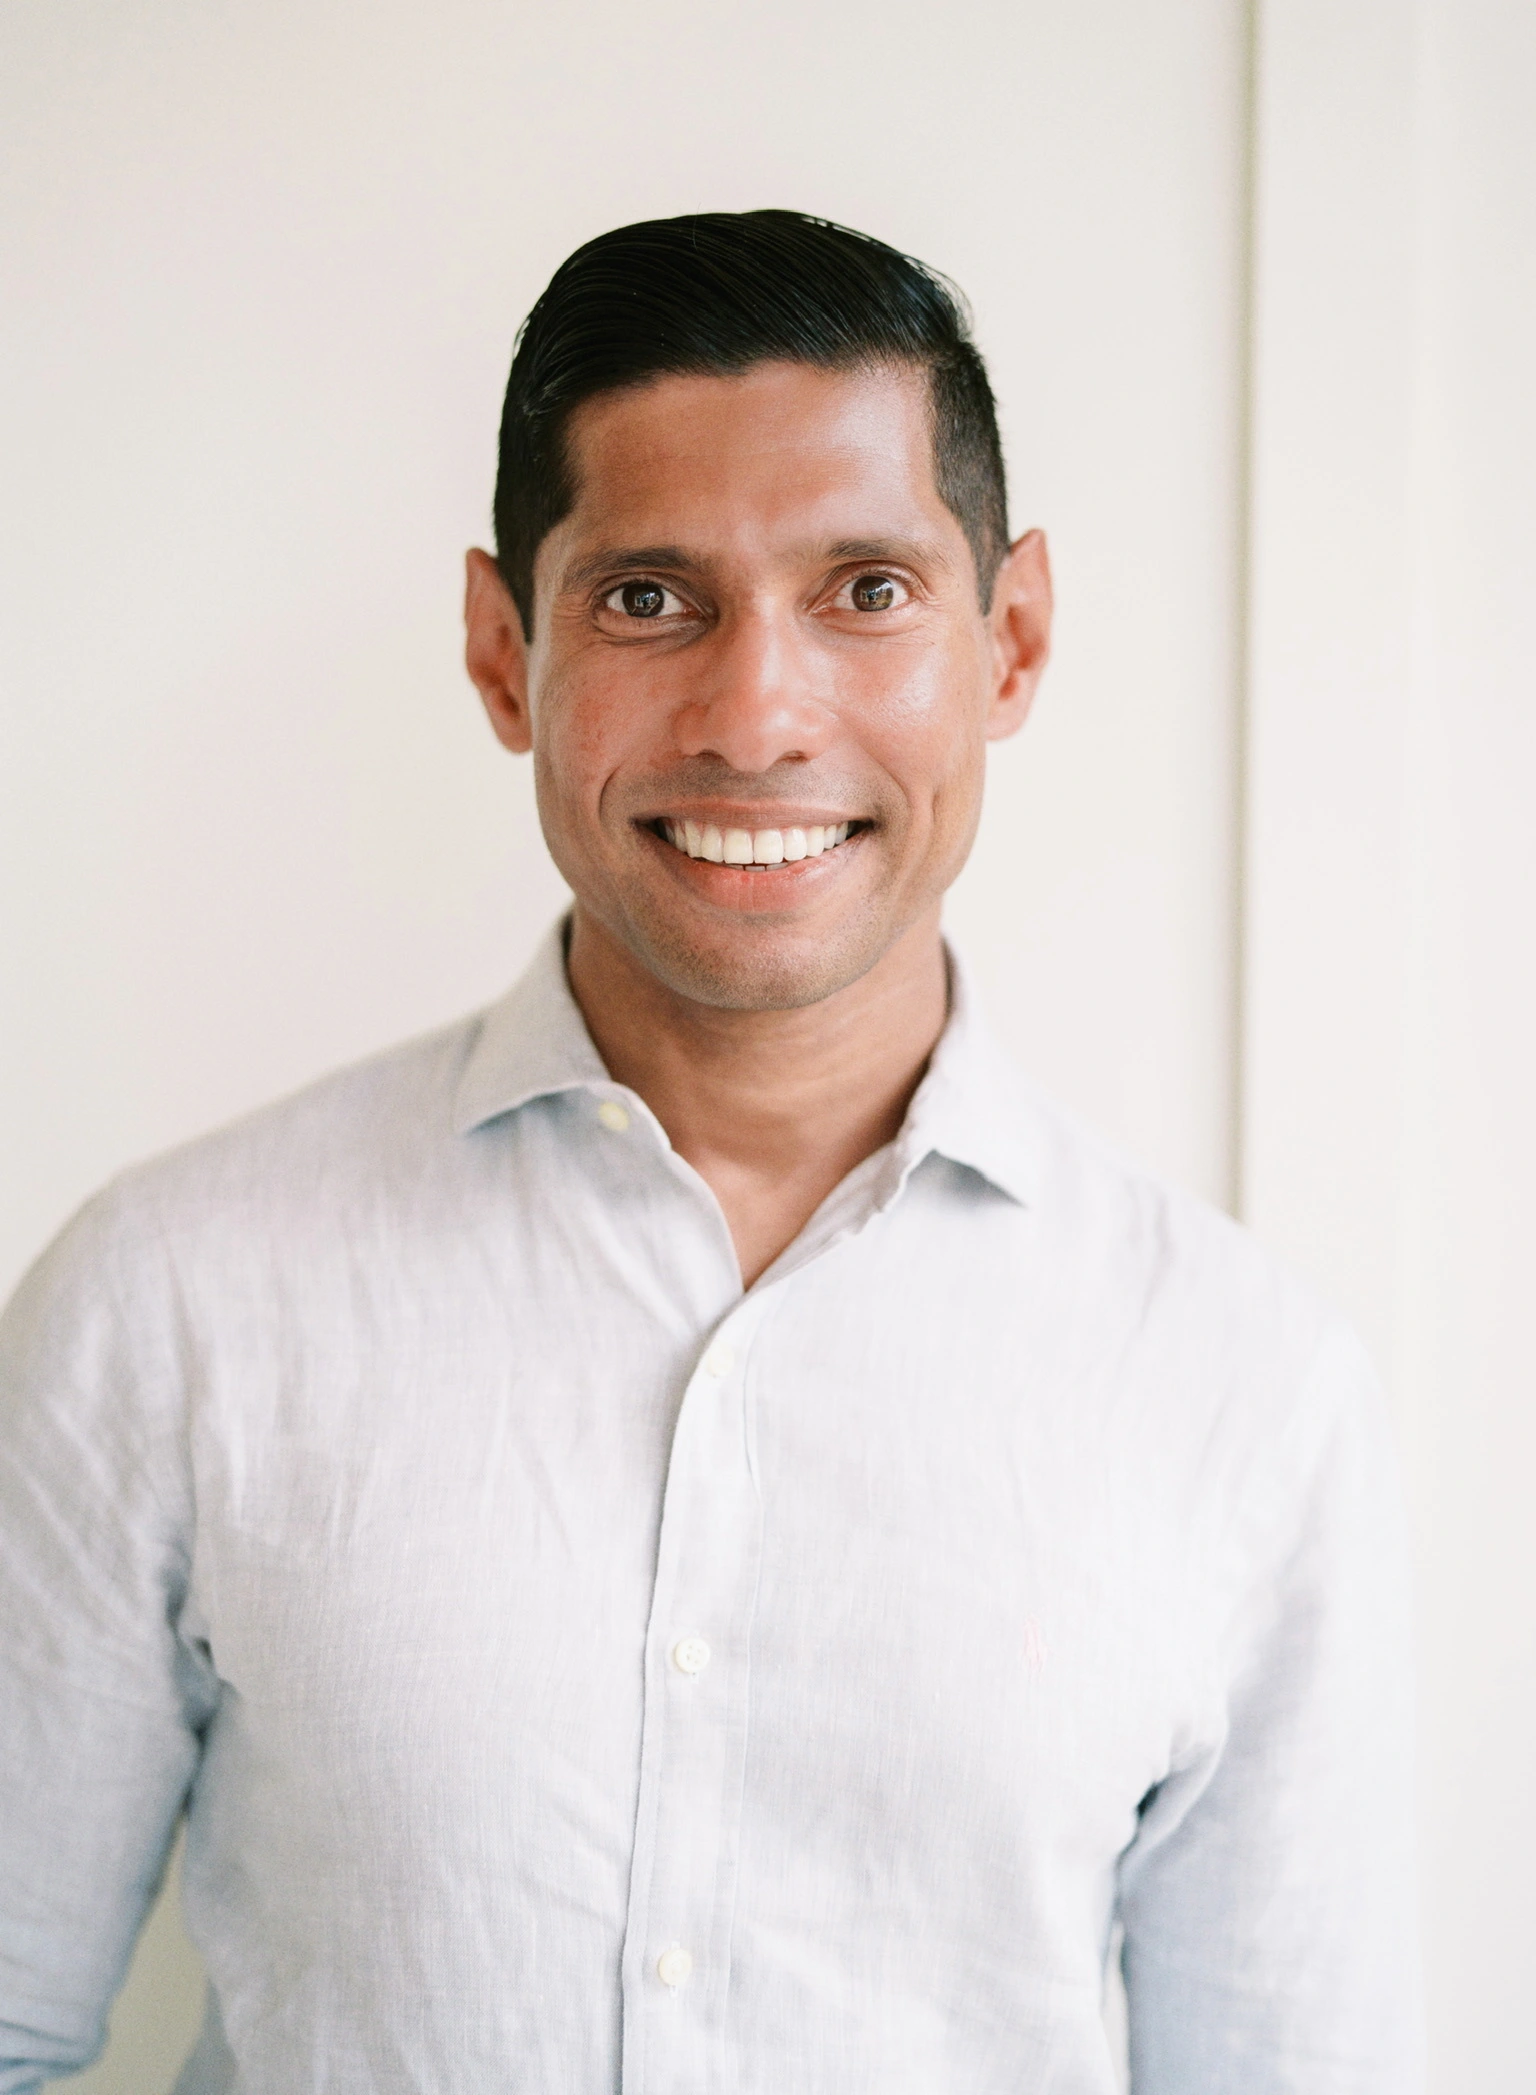 SweatWorks Founder Mohammed Iqbal on the Future of Fitness